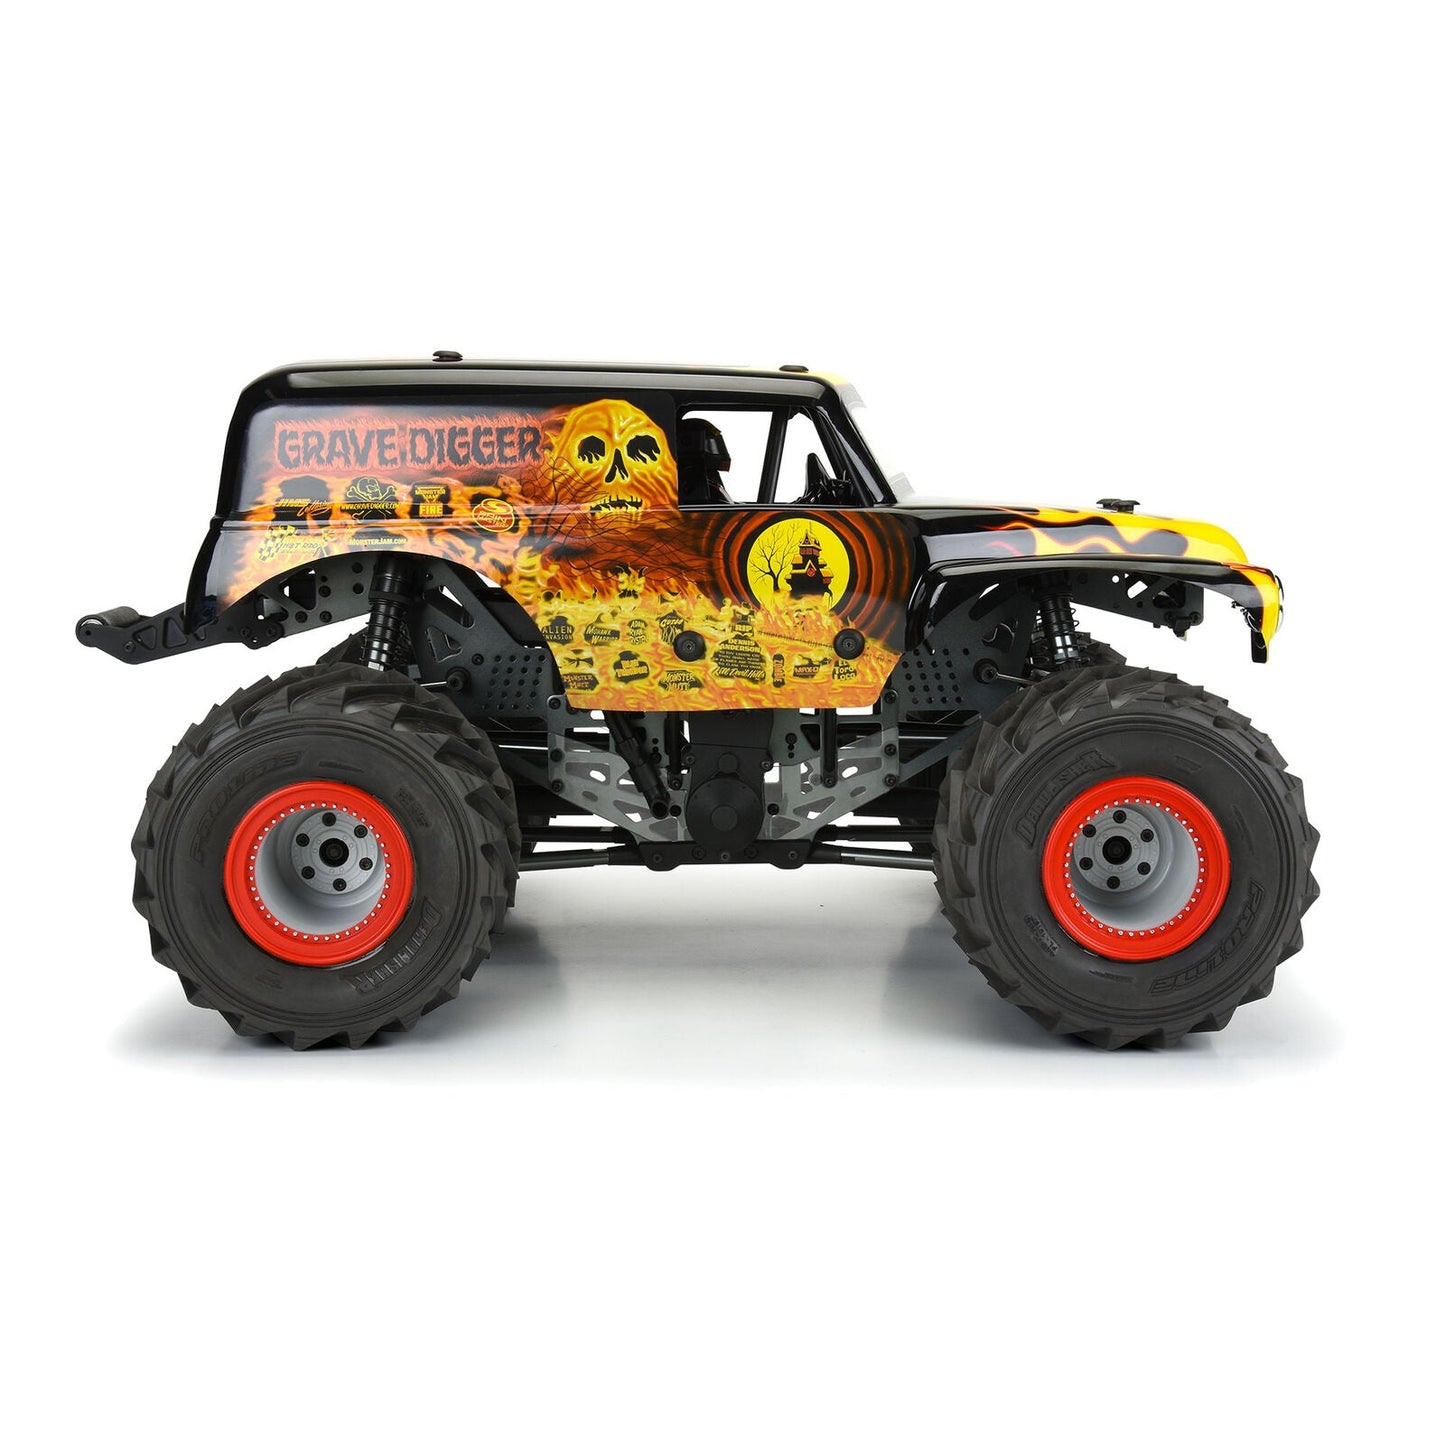 LOSI 359312 Grave Digger Fire (Red) Painted Body for LMT Monster Truck